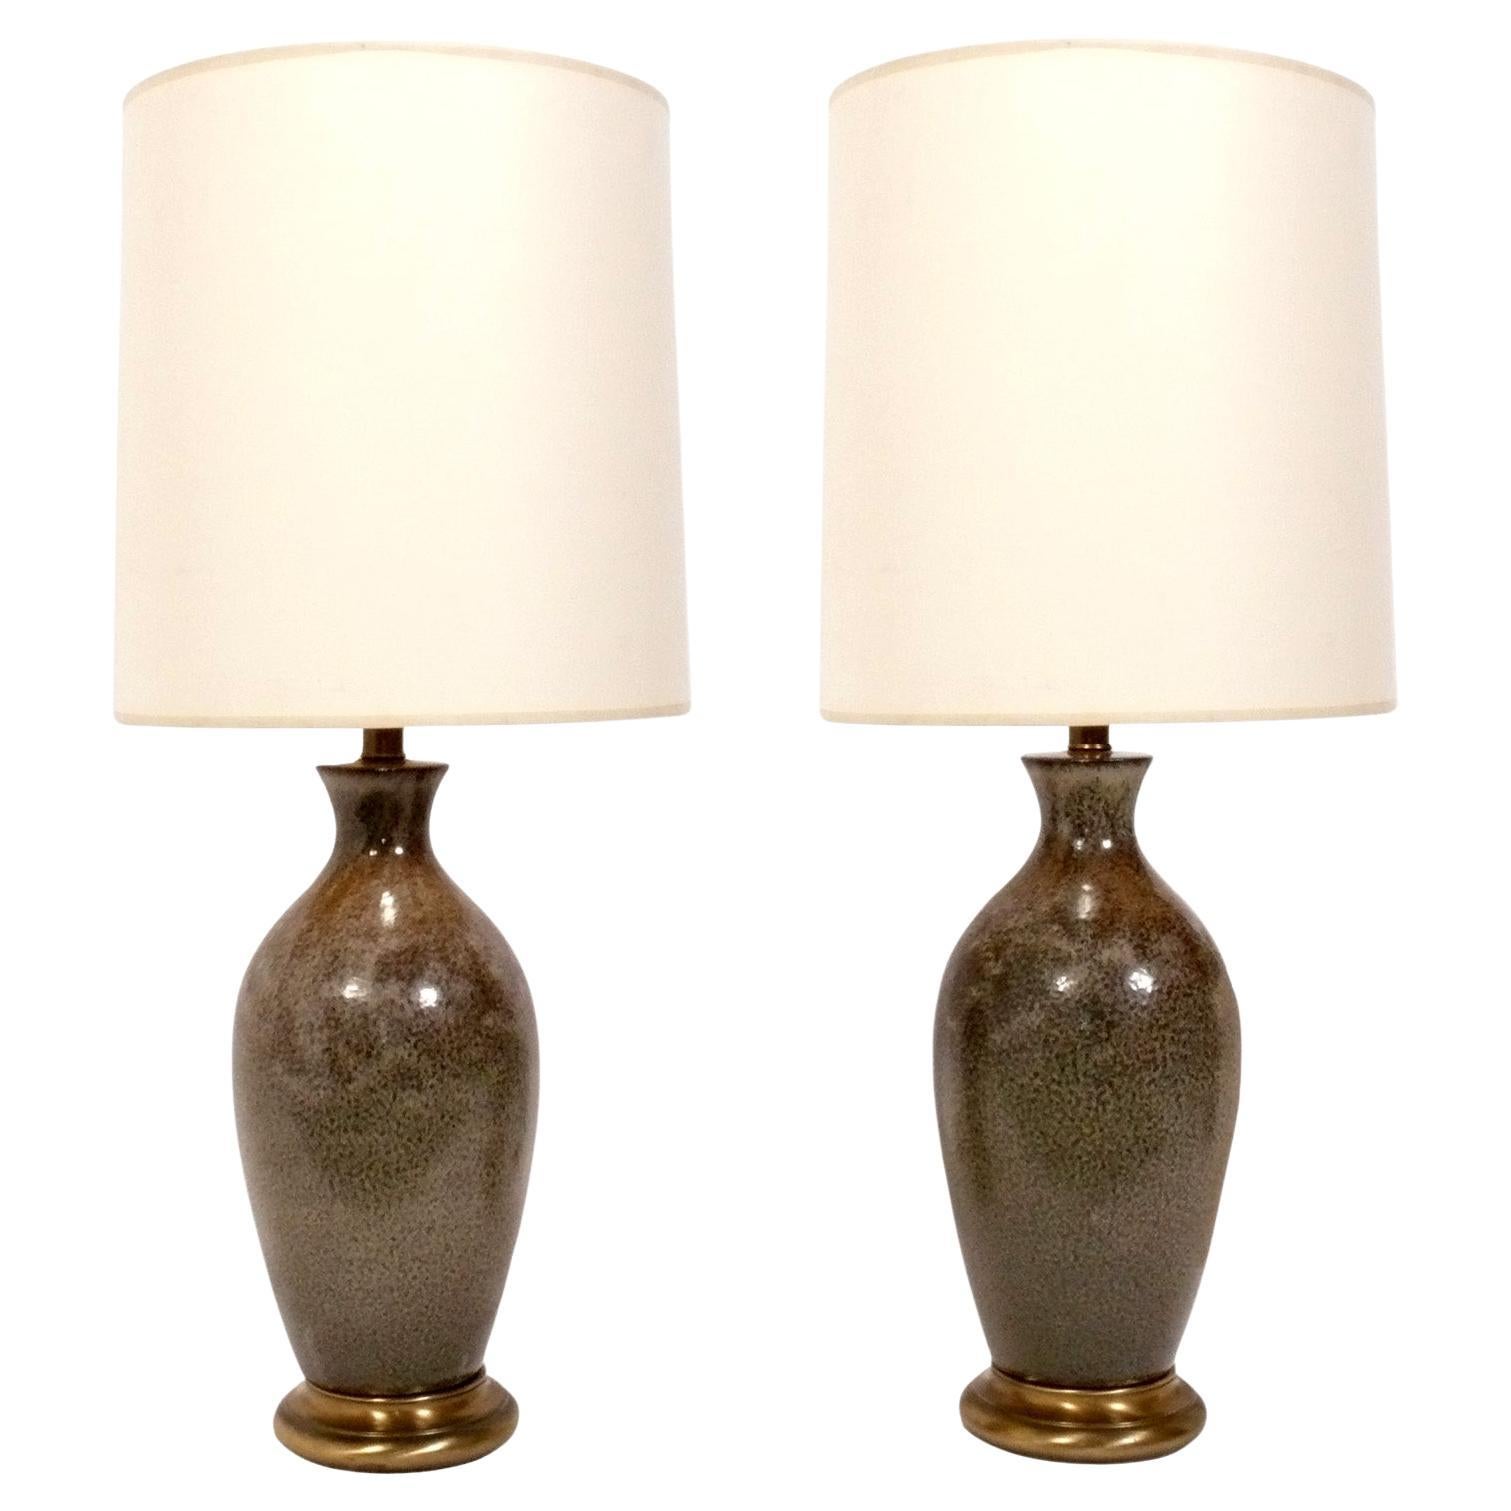 Elegant Mid Century Pottery Lamps with Speckled Brown Glaze  For Sale